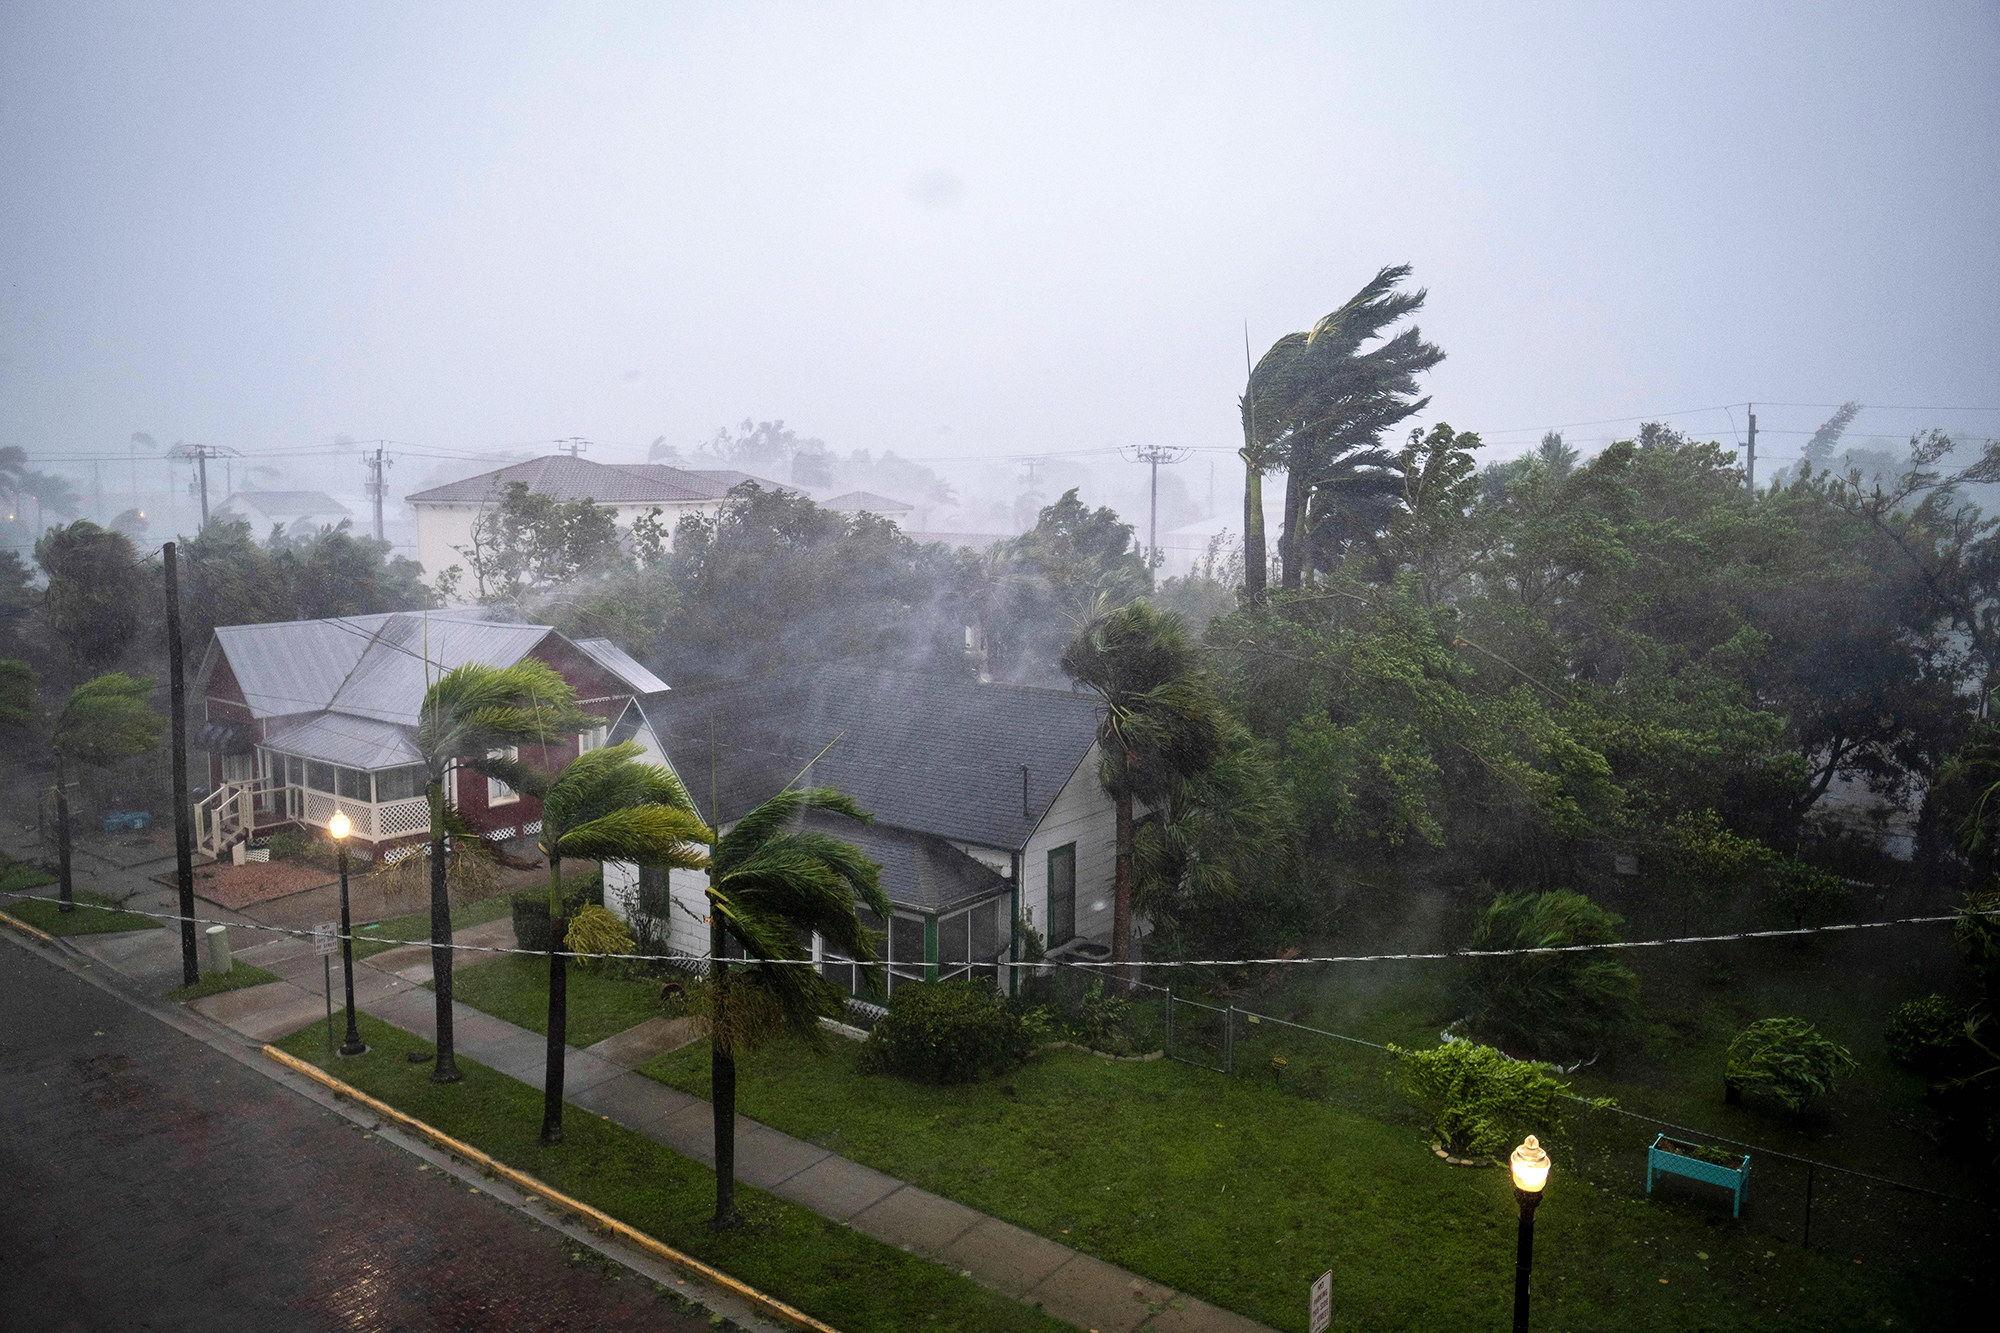 Palm trees blow in the rain near houses